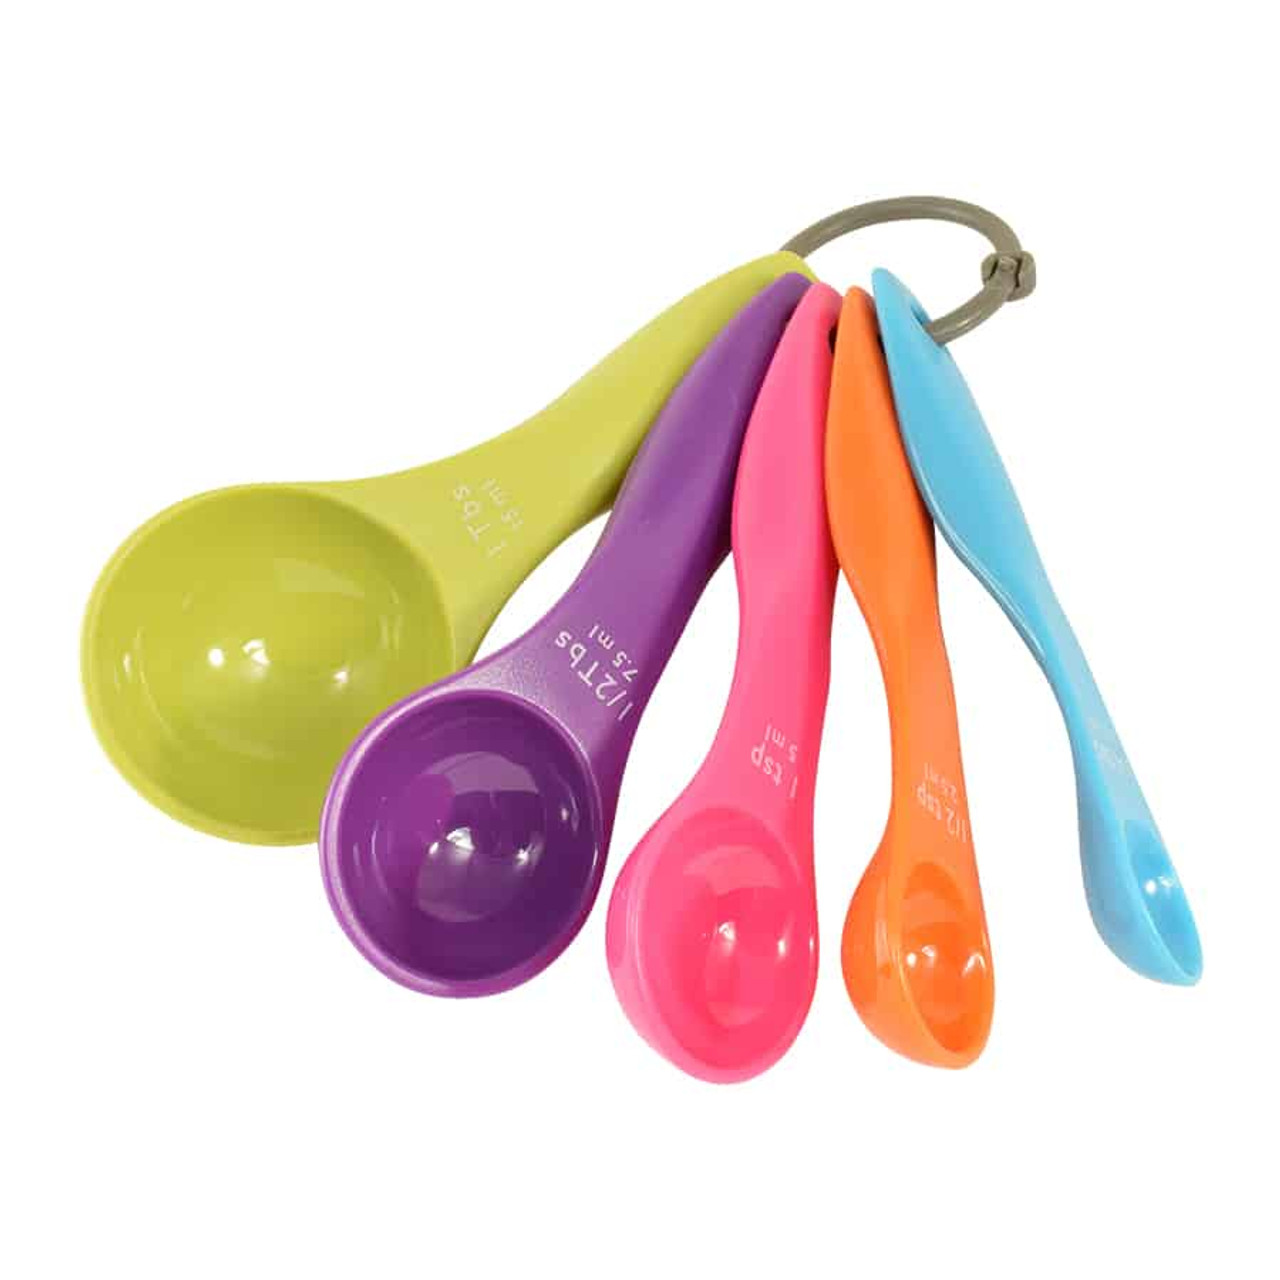 Measuring Spoons - Colorful Hummingbirds